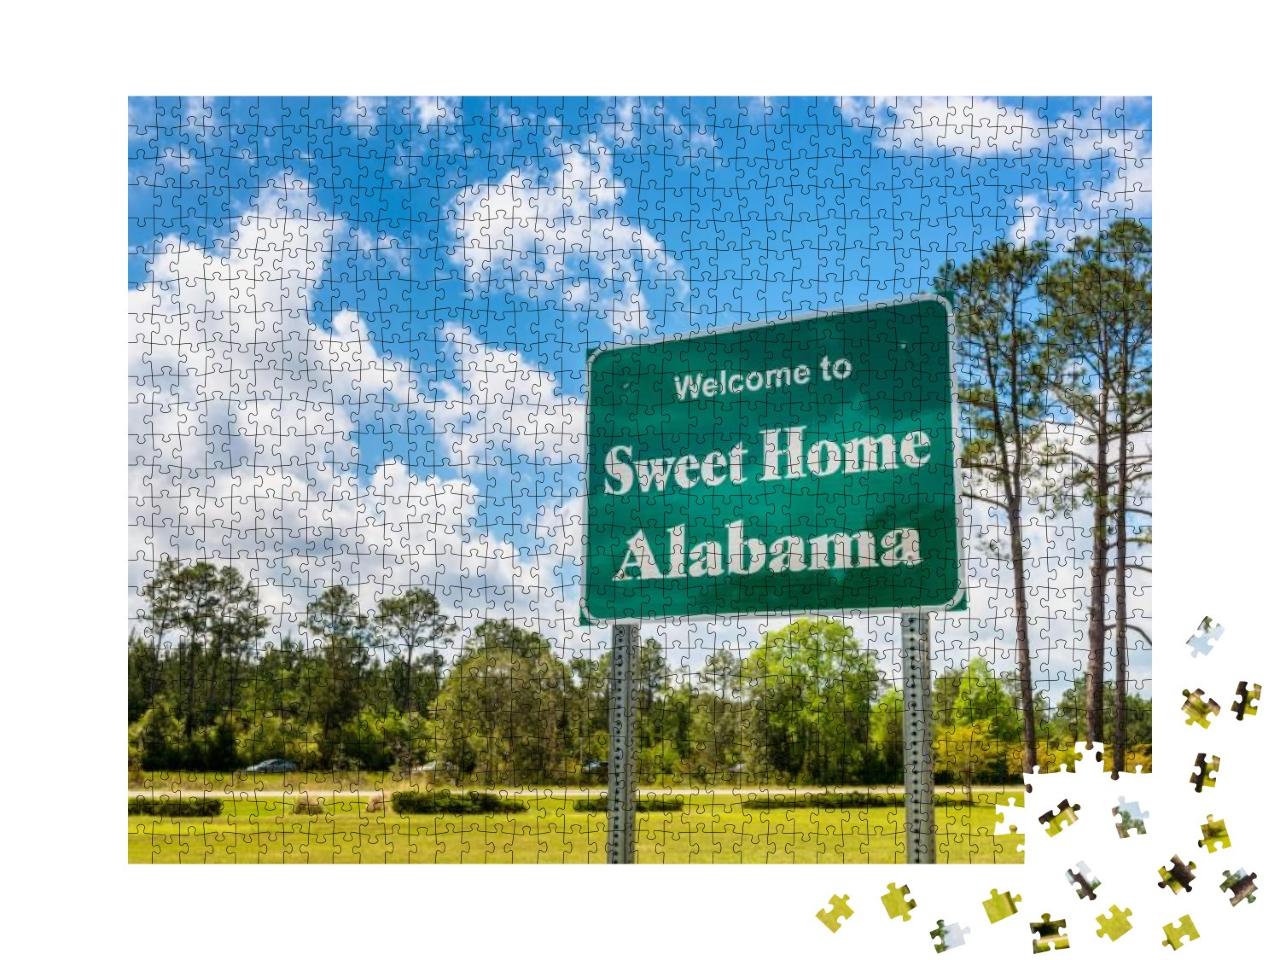 Welcome to Sweet Home Alabama Road Sign Along Interstate... Jigsaw Puzzle with 1000 pieces